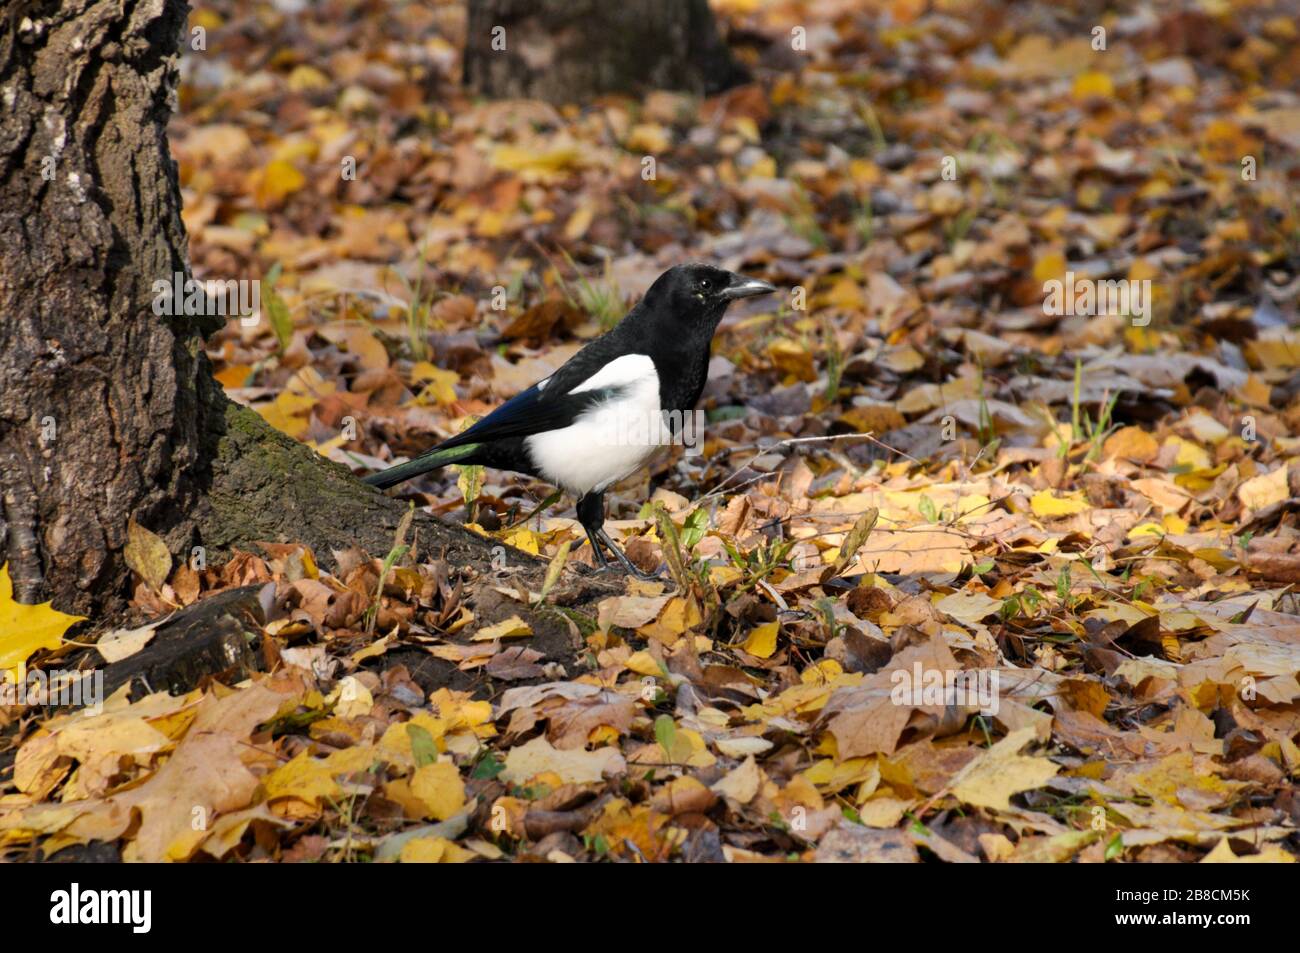 Magpie walks on fallen autumn foliage in the forest. Stock Photo